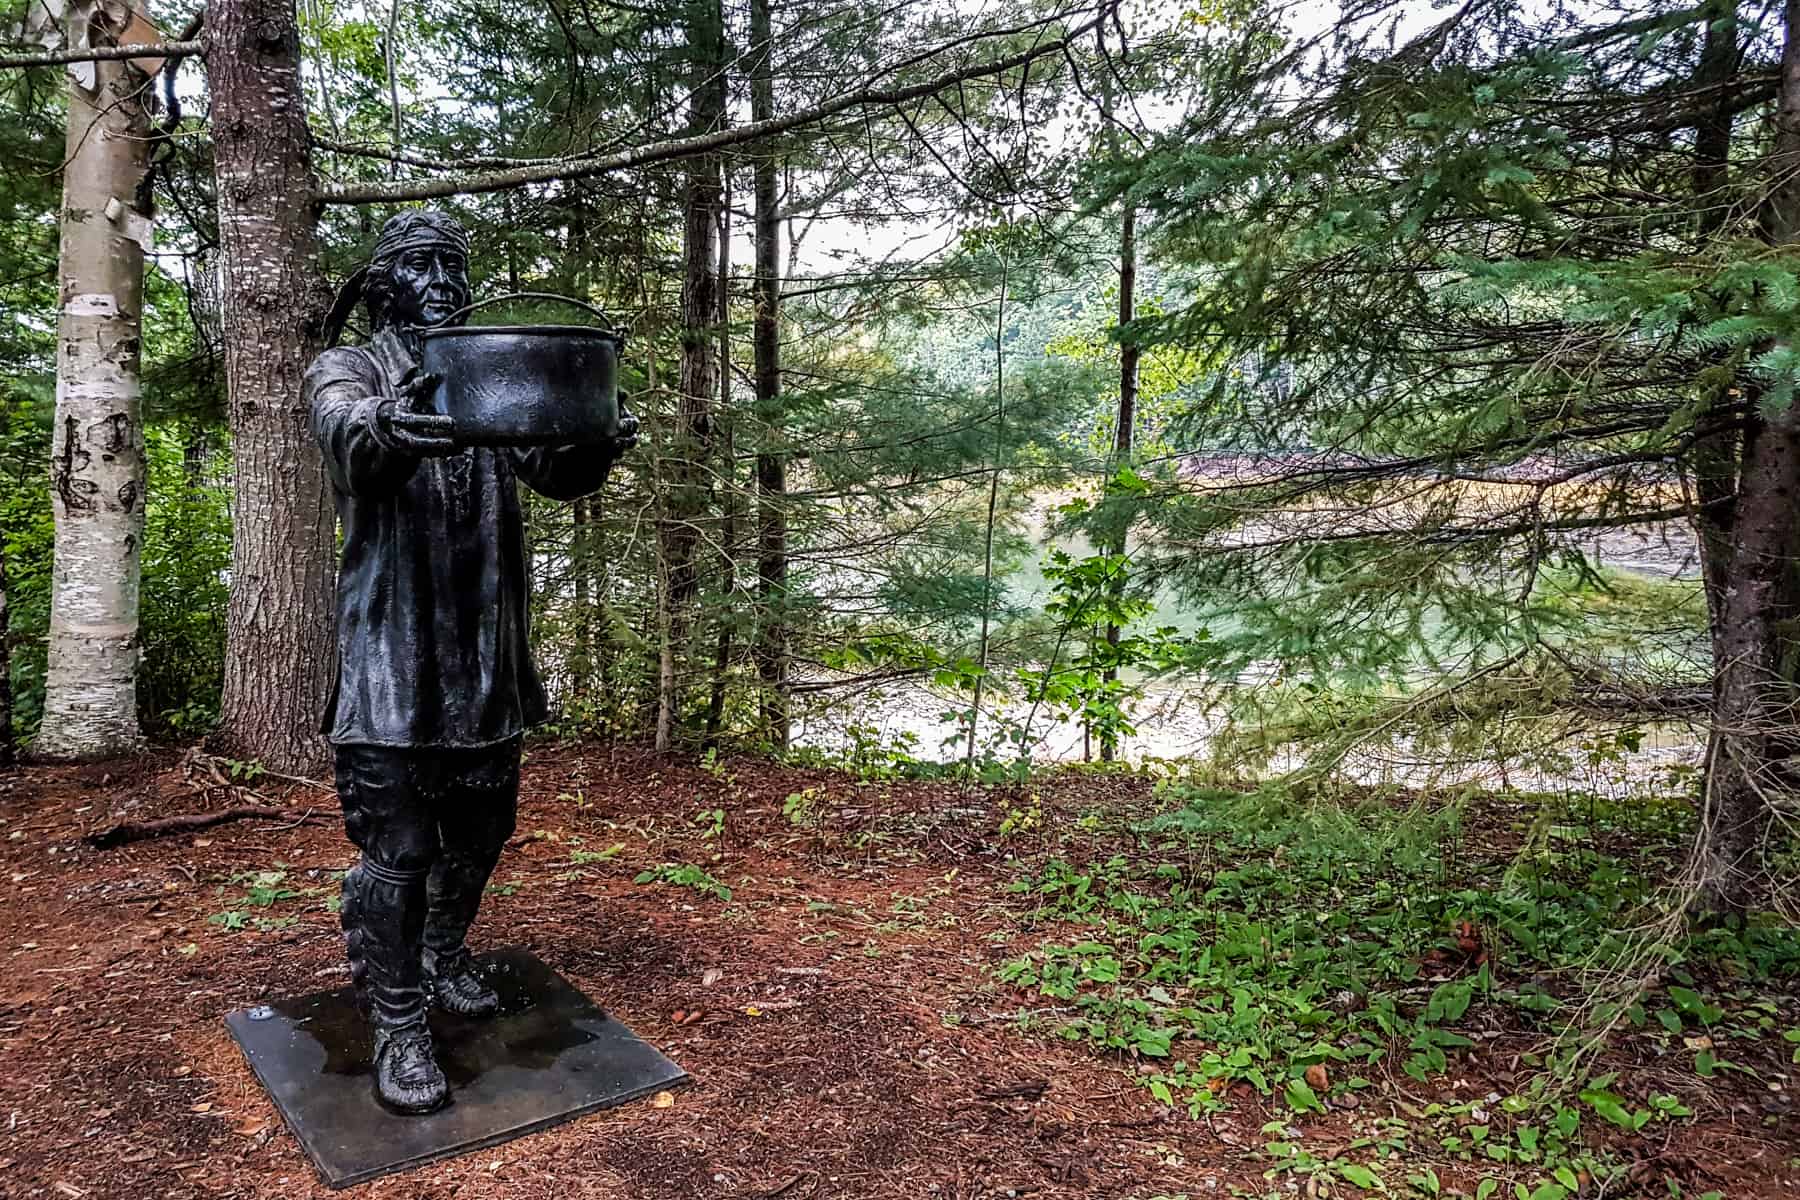 A black bronze statues holding a large bowl and depicting life on the settlement, standing within the Saint Croix Historical Site in Maine, US.